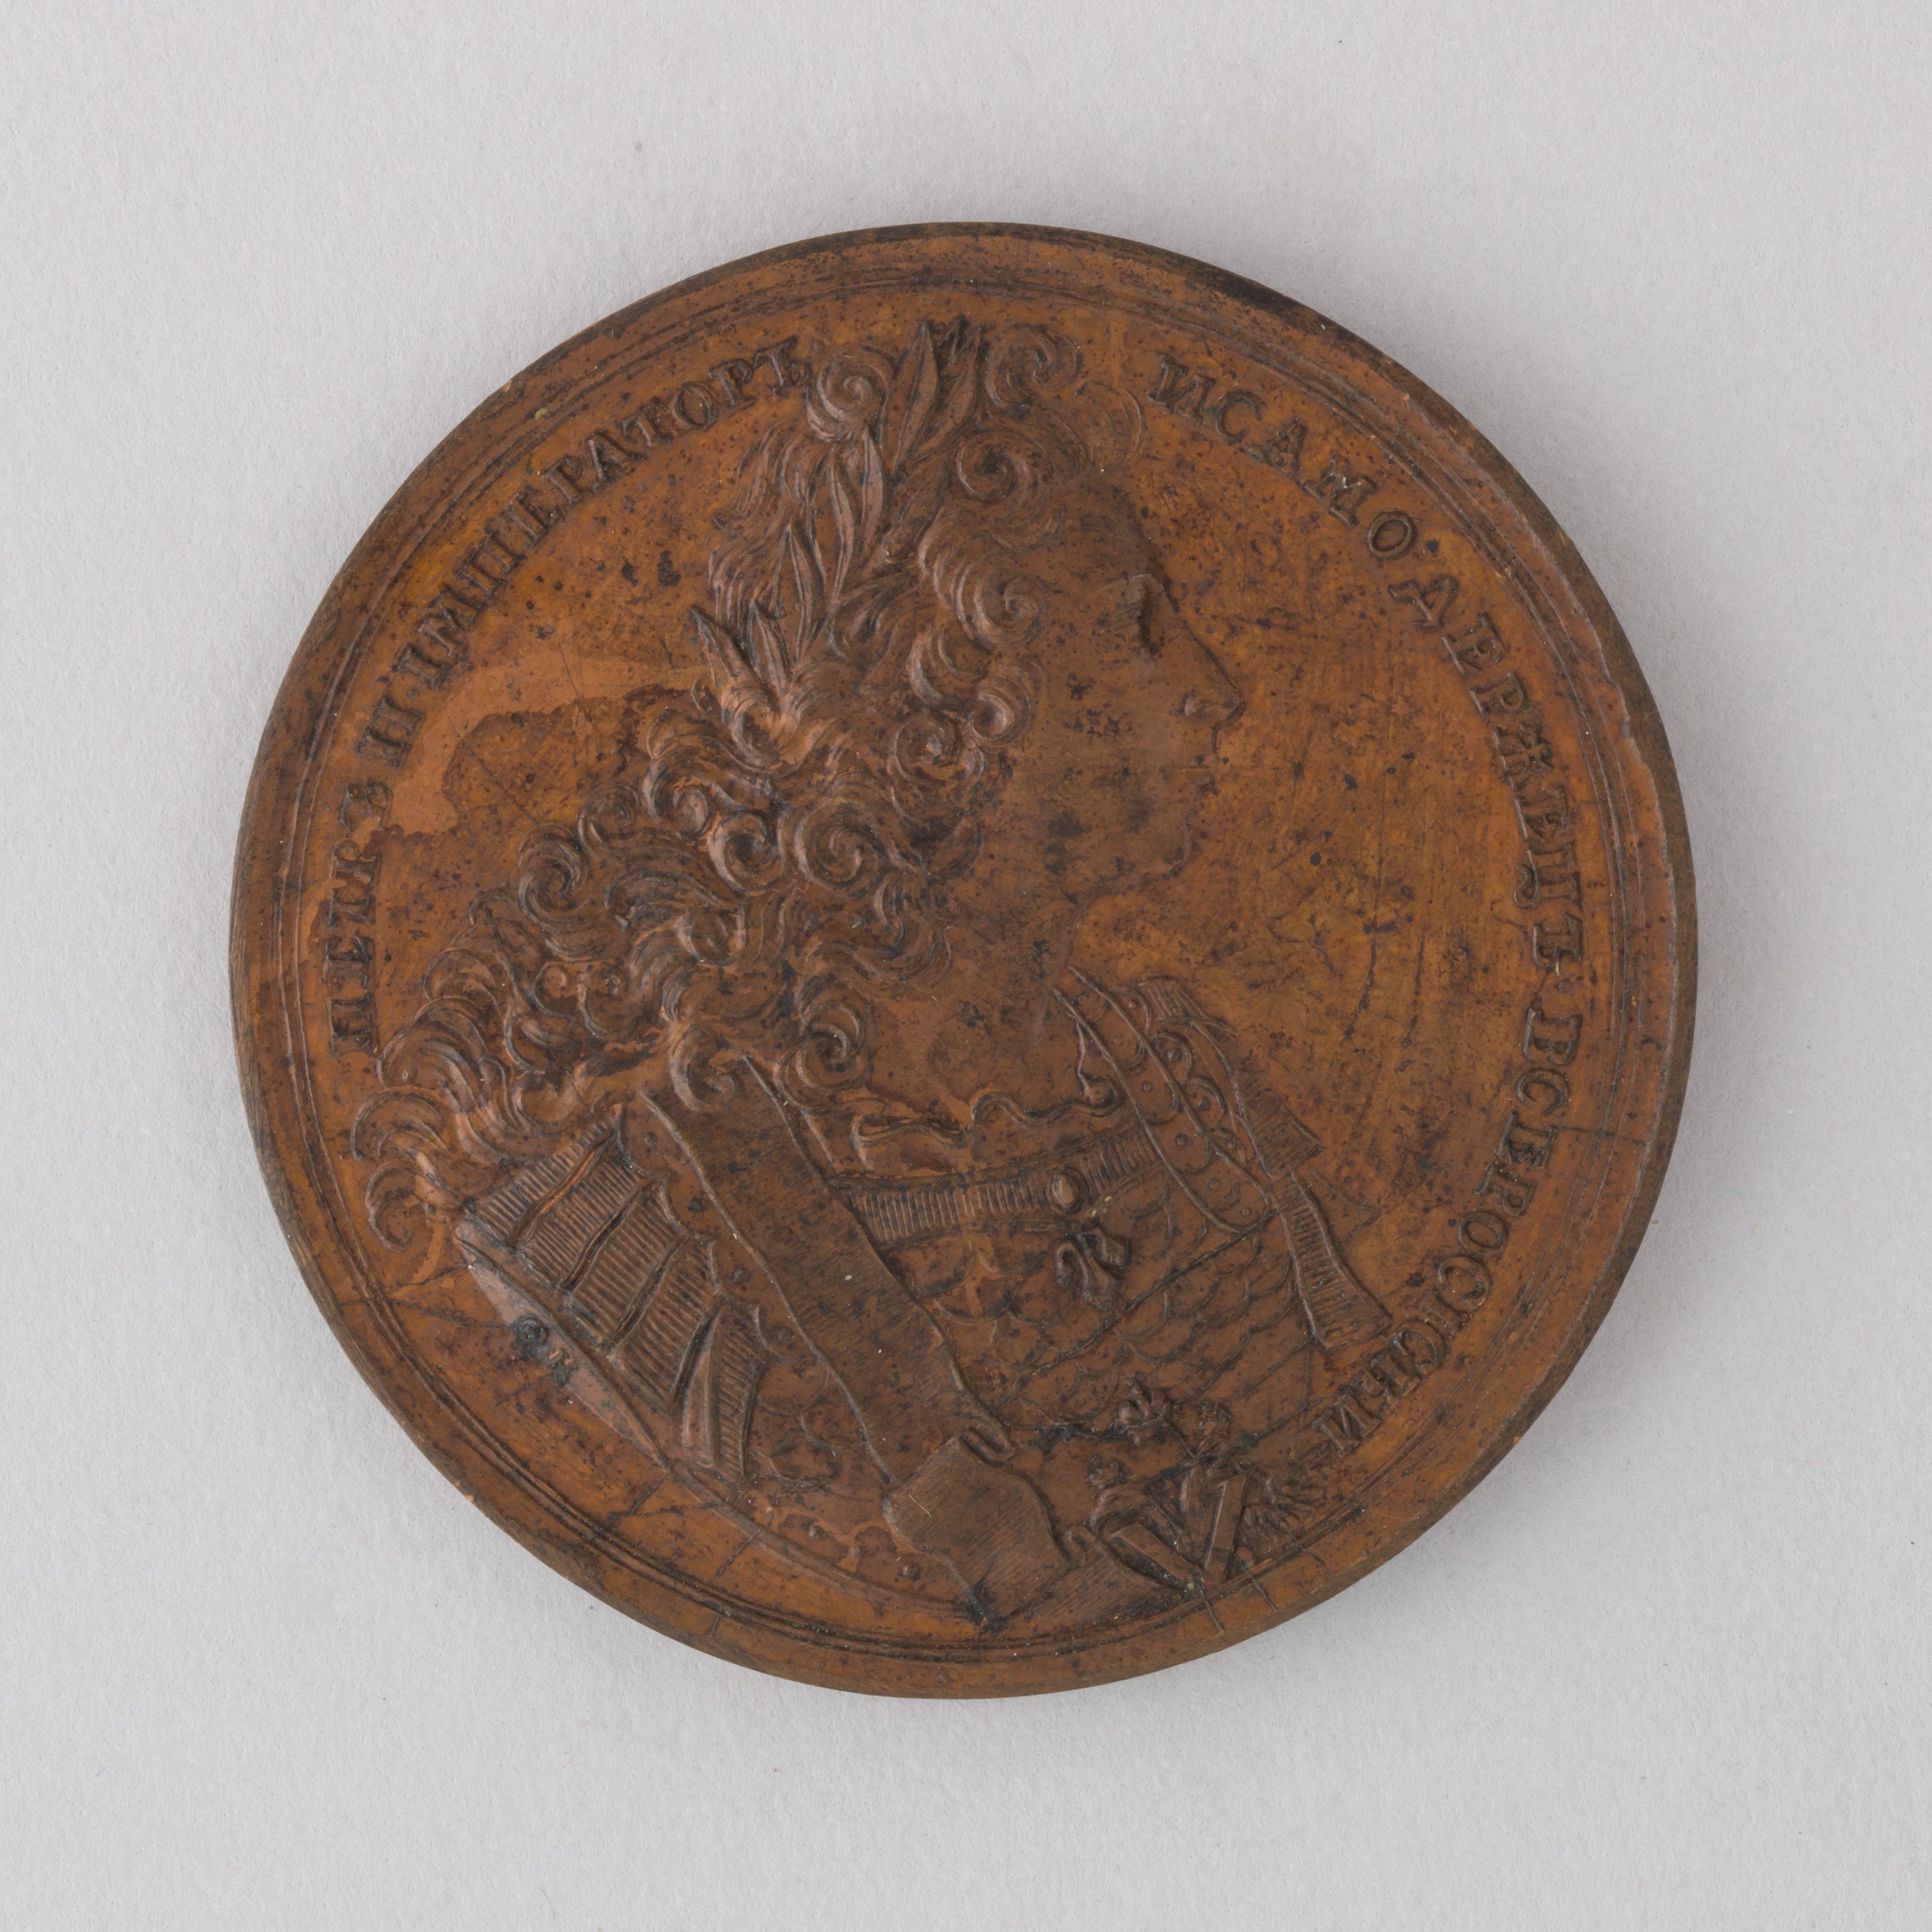 Medal Commemorating the Coronation of Peter II at Moscow, 1728 